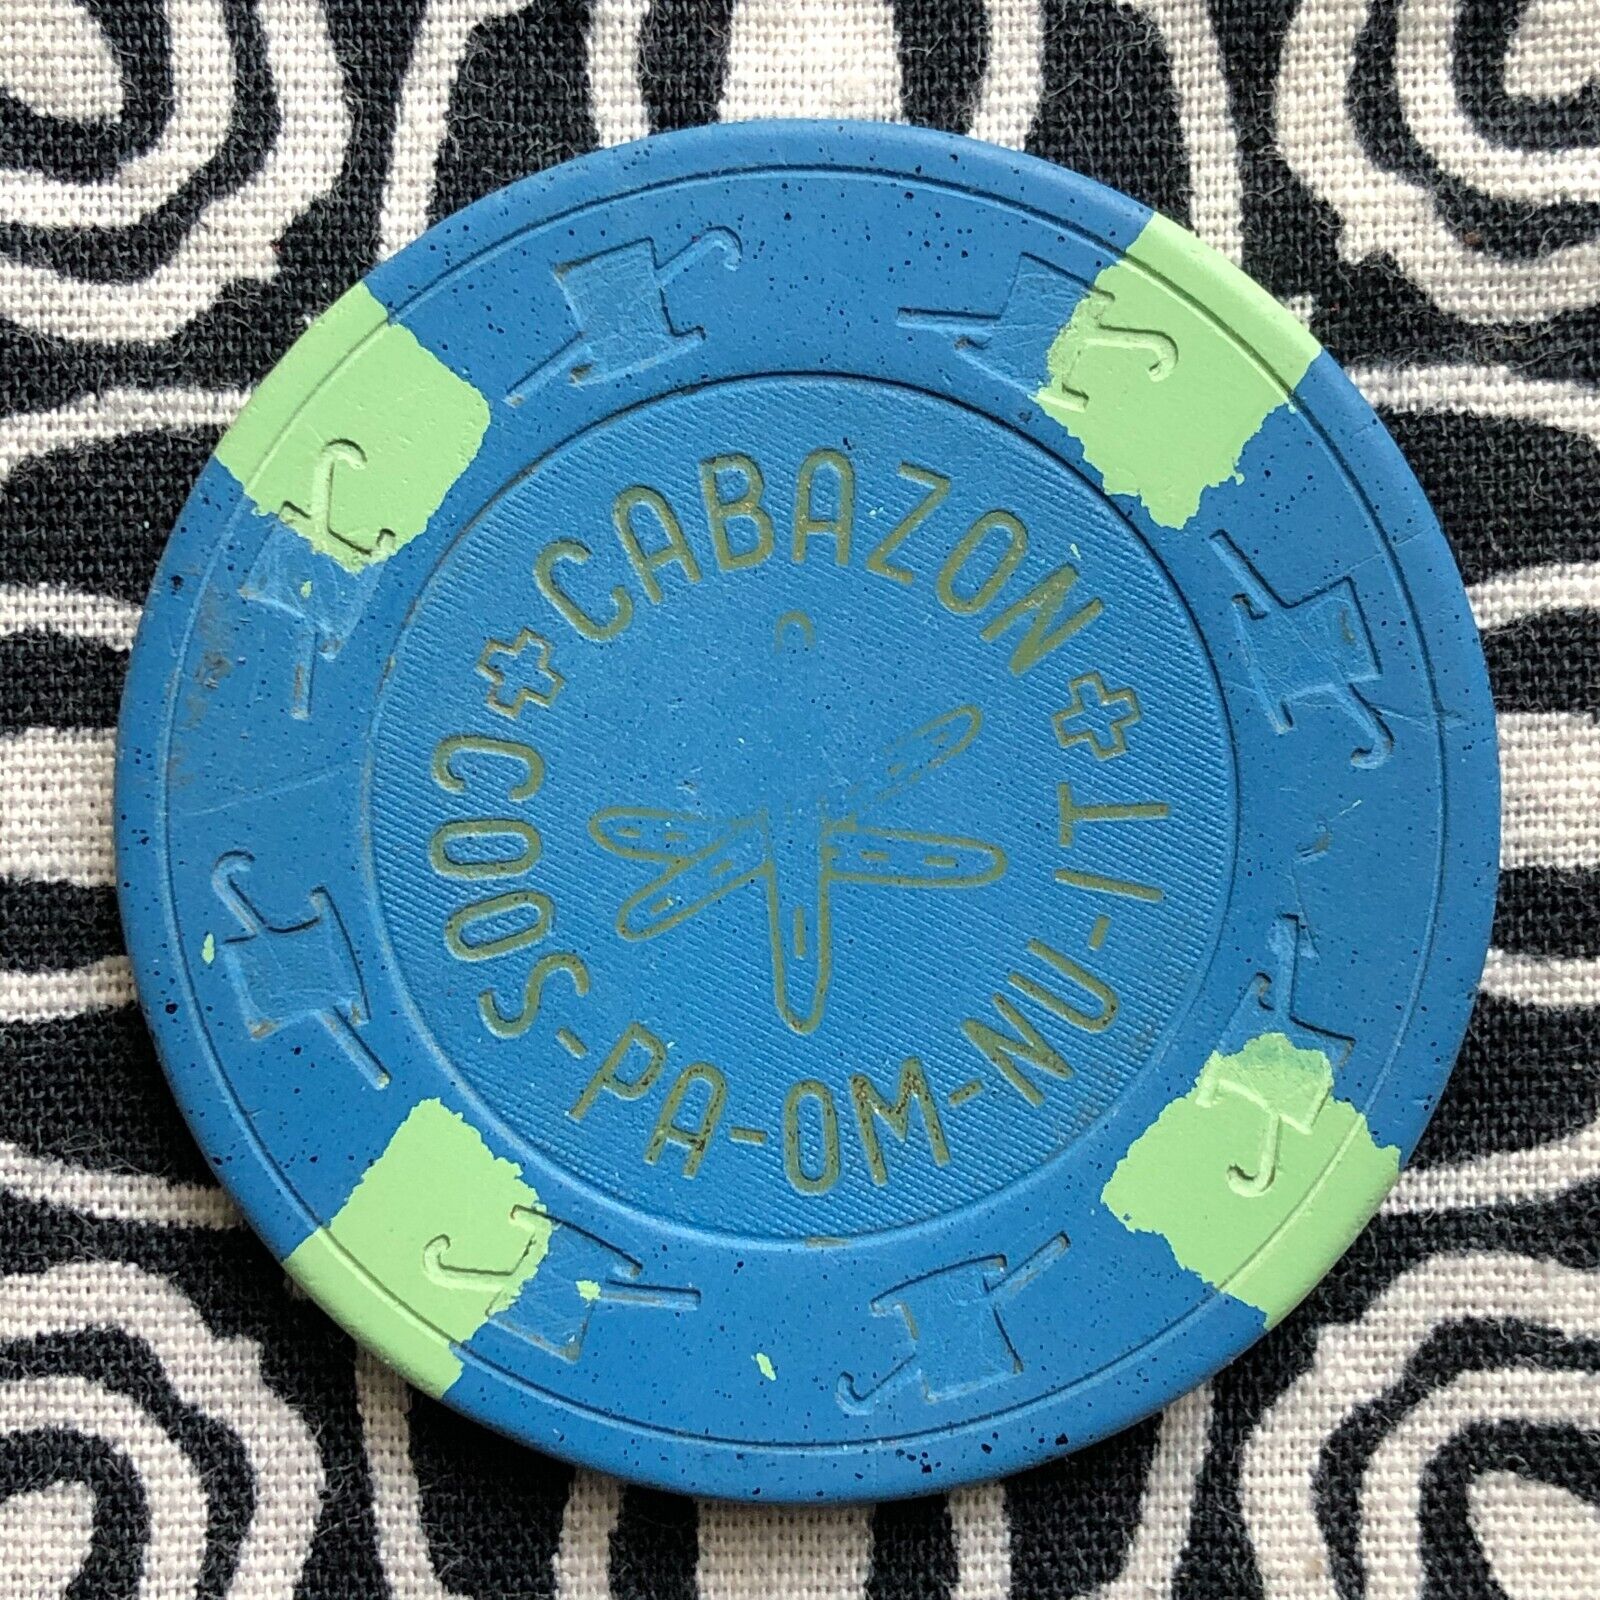 Coos-Pa-Om-Nu-It $1.00 Cabazon, California Gaming Poker Casino Chip